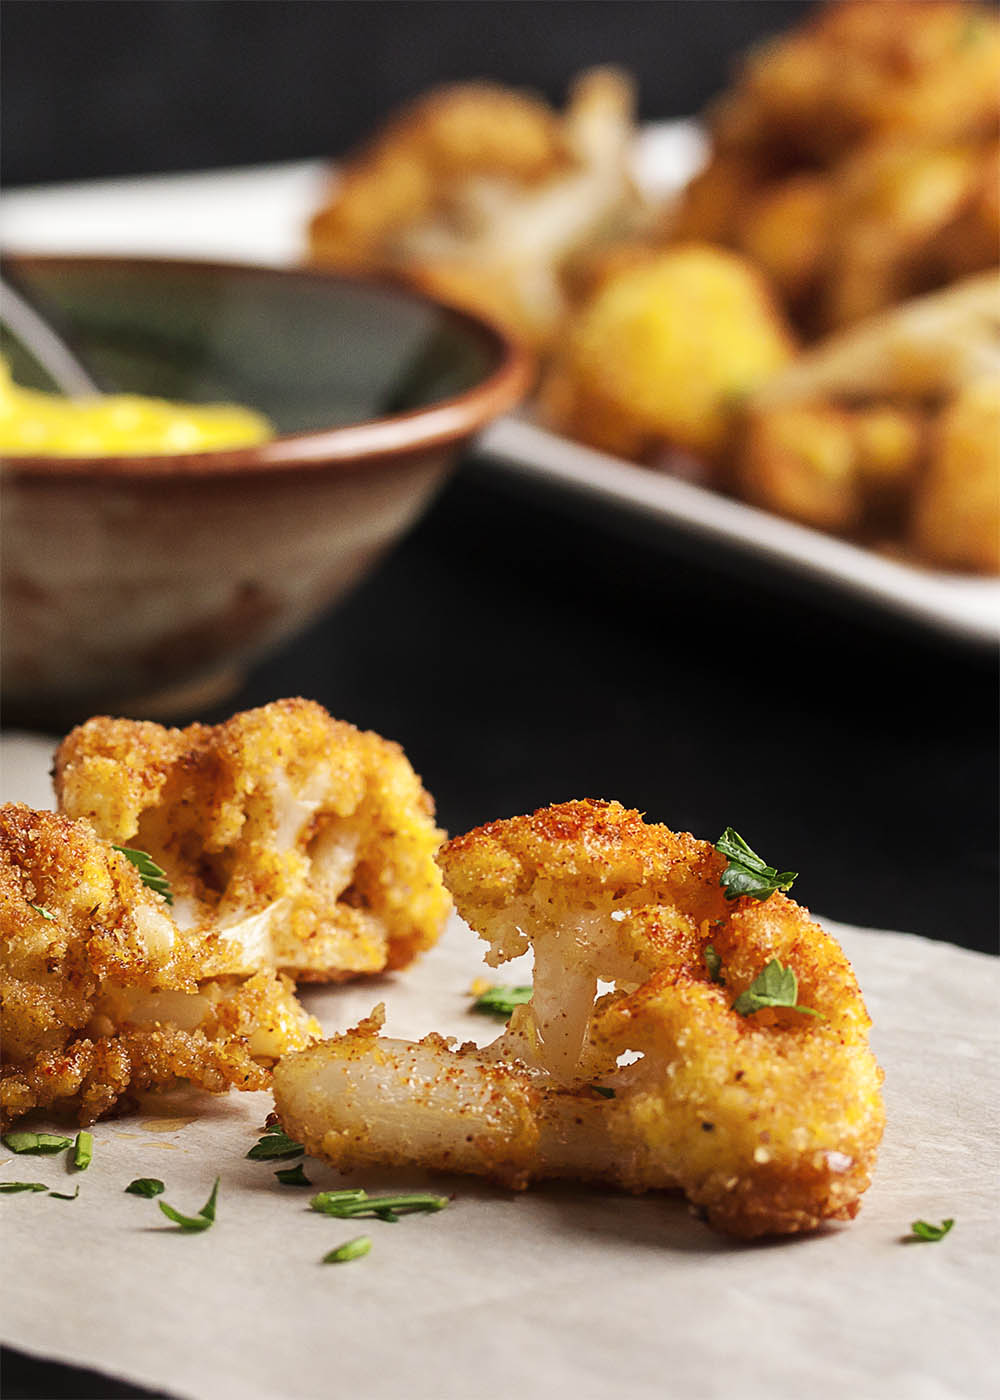 Pan Fried Spanish Cauliflower Tapas - These breaded fried cauliflower bites are a simple and tasty tapas dish you should make at your next get-together! Just a quick dunking in egg and breadcrumbs and a minute in a skillet and you are all done. Can be made ahead and reheated! | justalittlebitofbacon.com